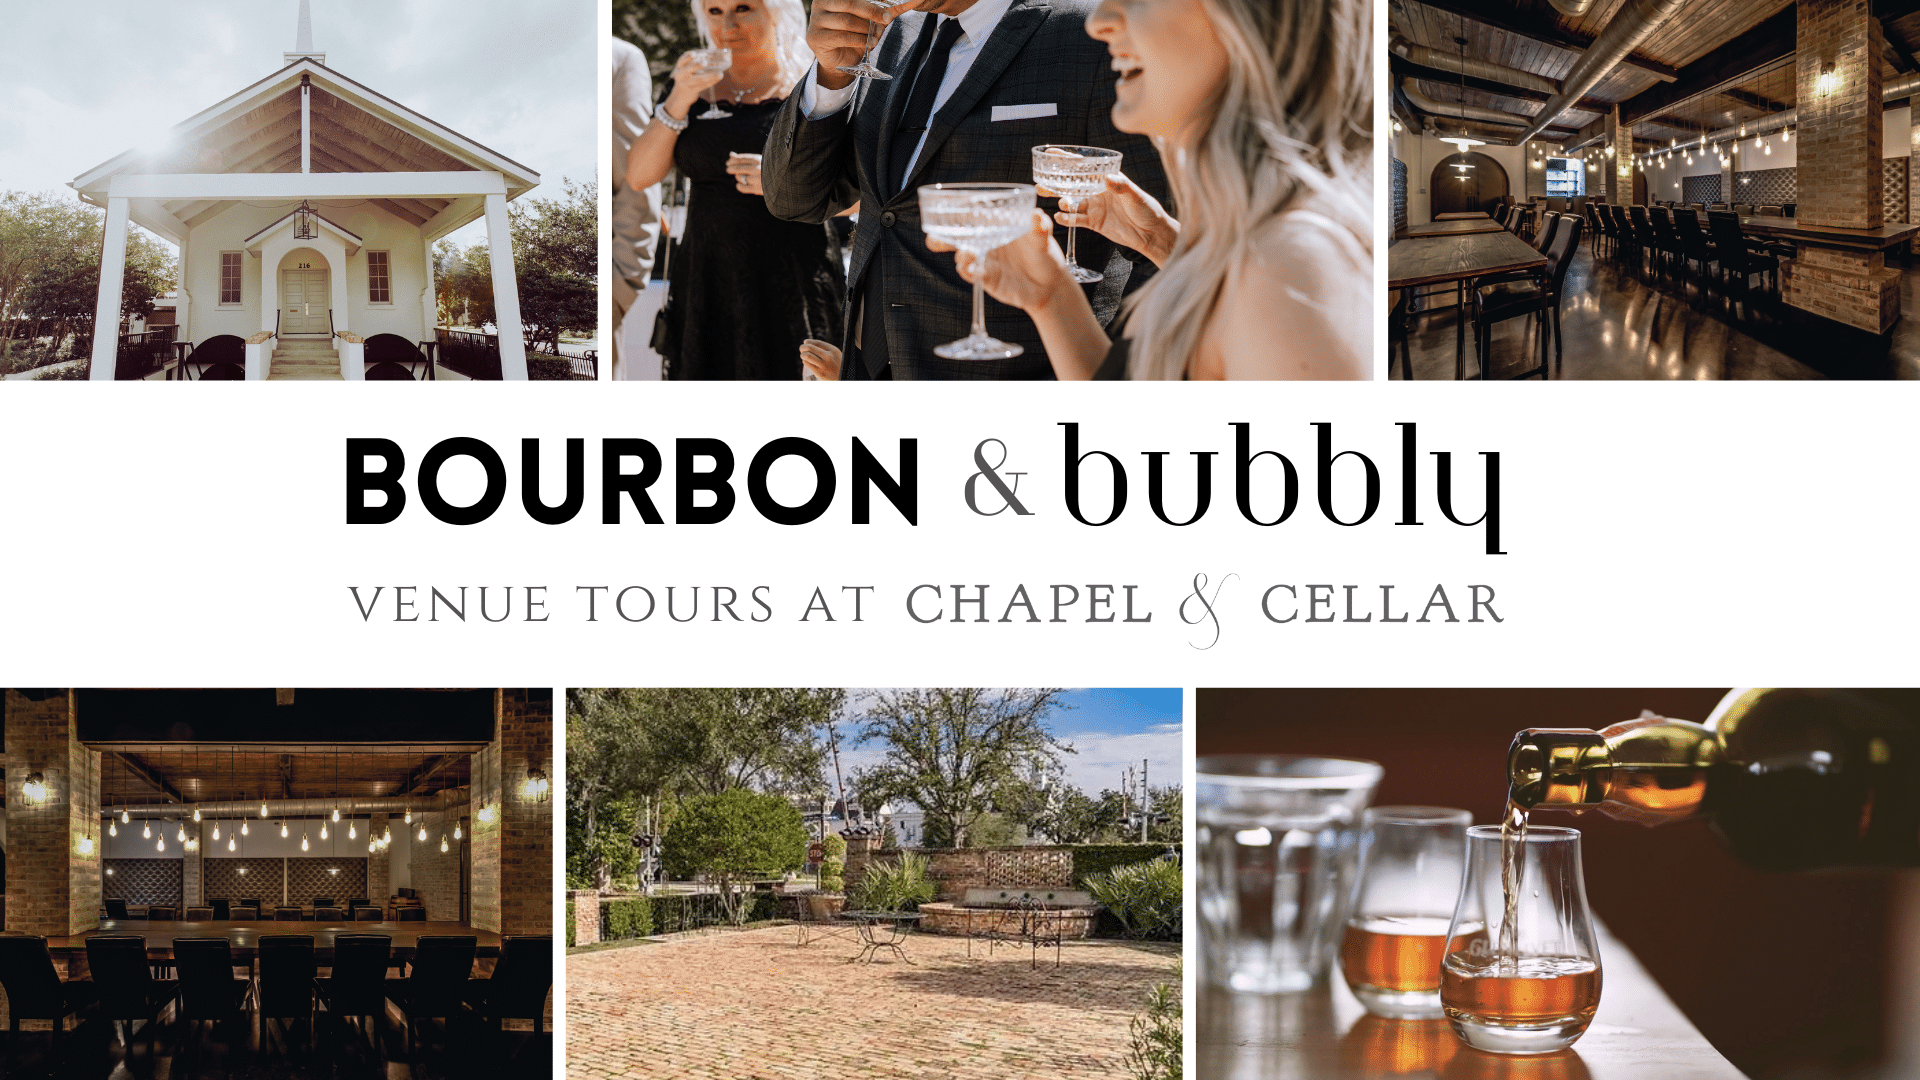 Bourbon and bubbly venue tours at chapel and cellar